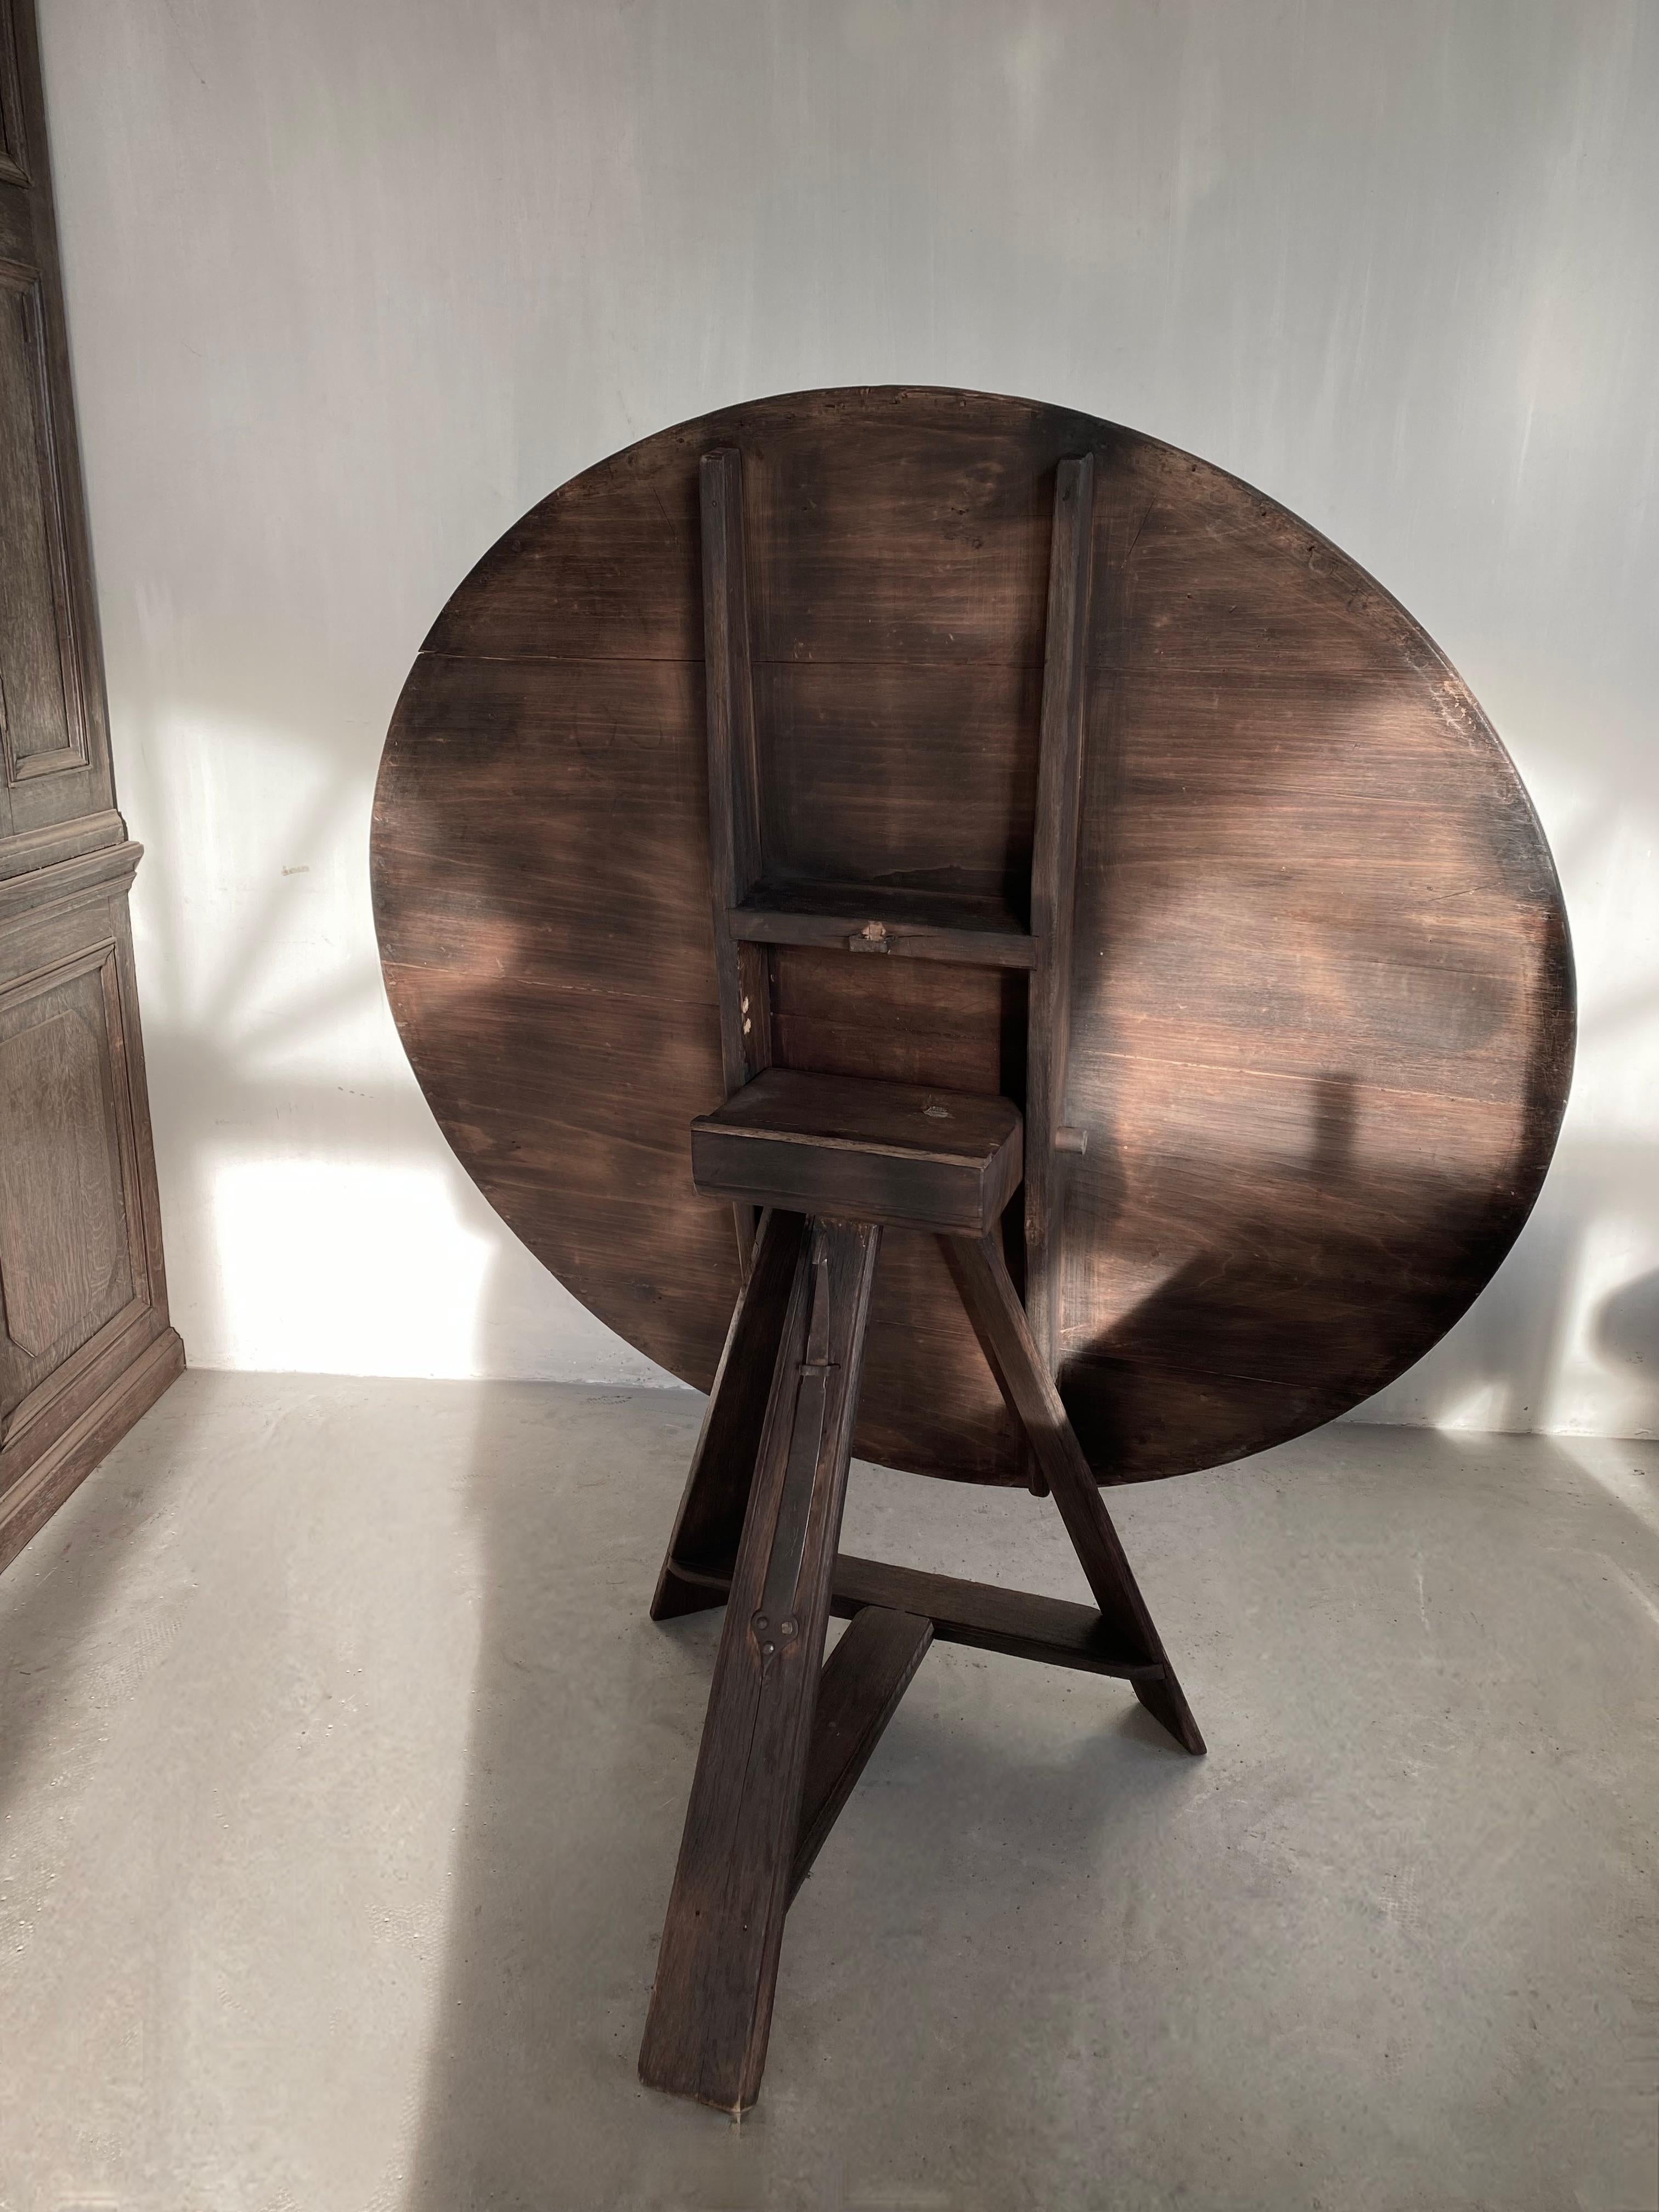 This beautiful and completely original Dutch folding table is a unique item.
In very good condition with the original 19th century steel handle to click the tablet to the legs.

The perfect table next to a sofa or in an entrance hall, as well as a